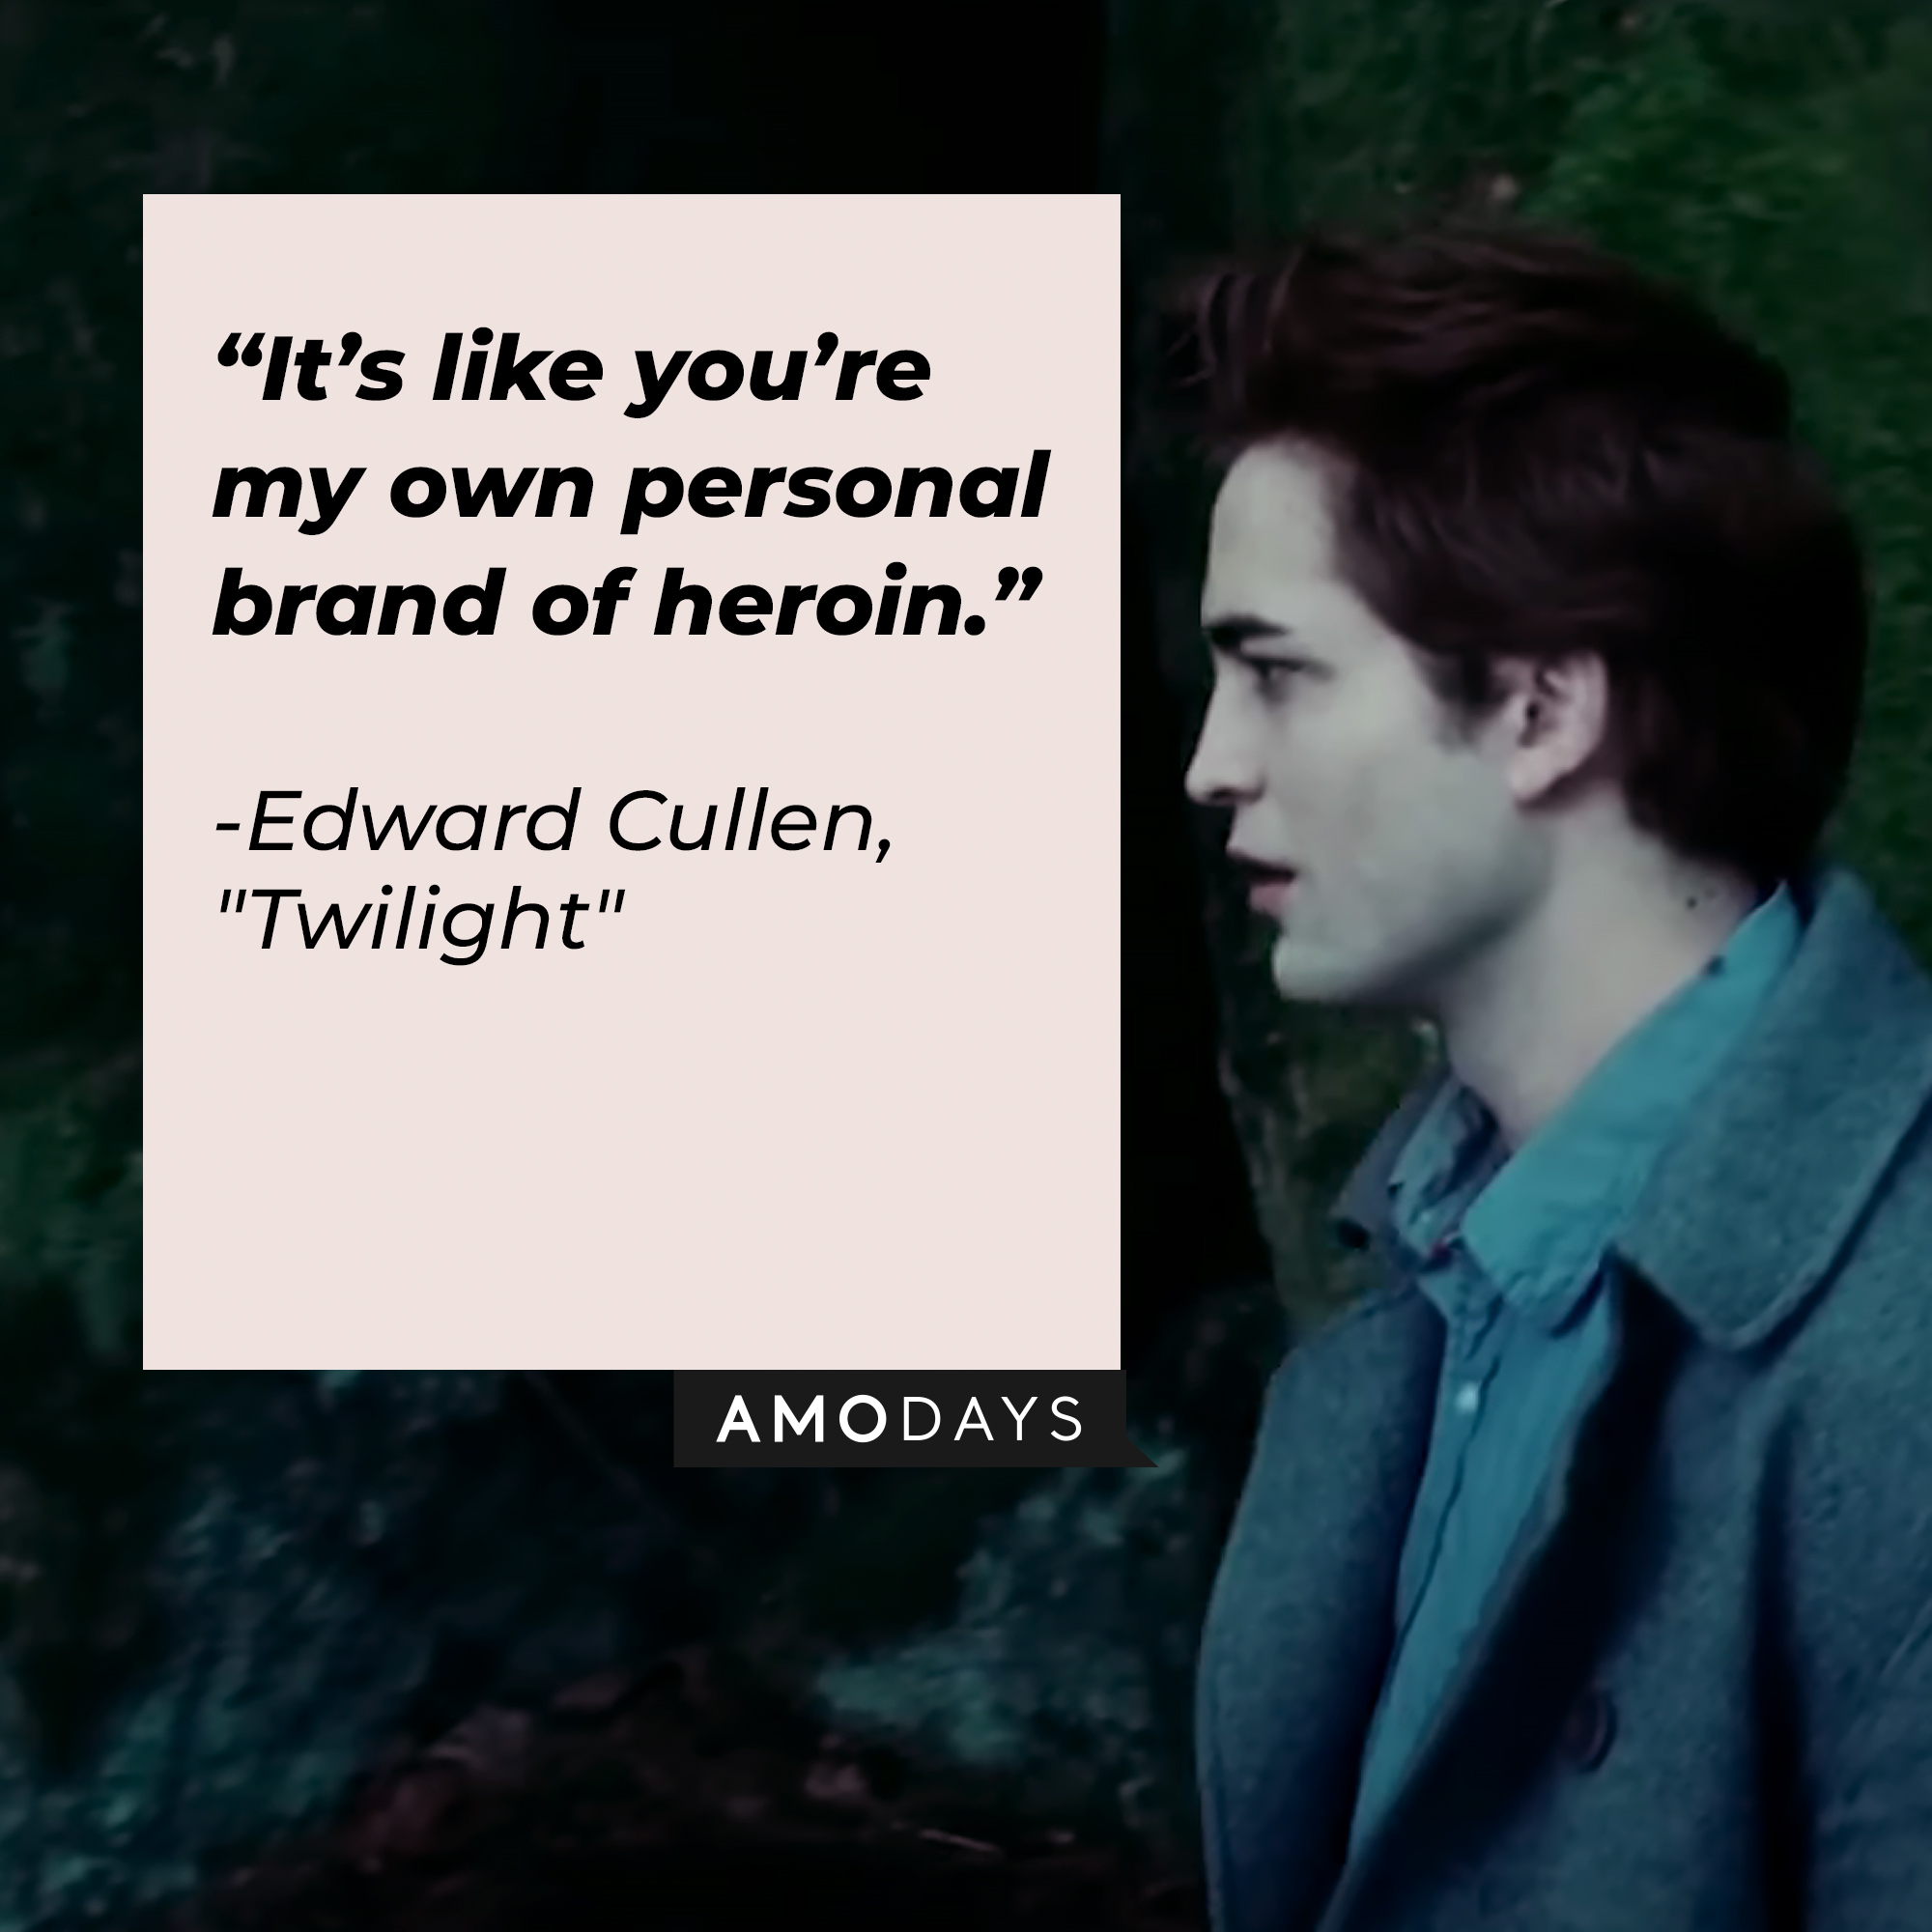 Edward Cullen with his quote: "It’s like you’re my own personal brand of heroin.” | Source: Facebook.com/twilight